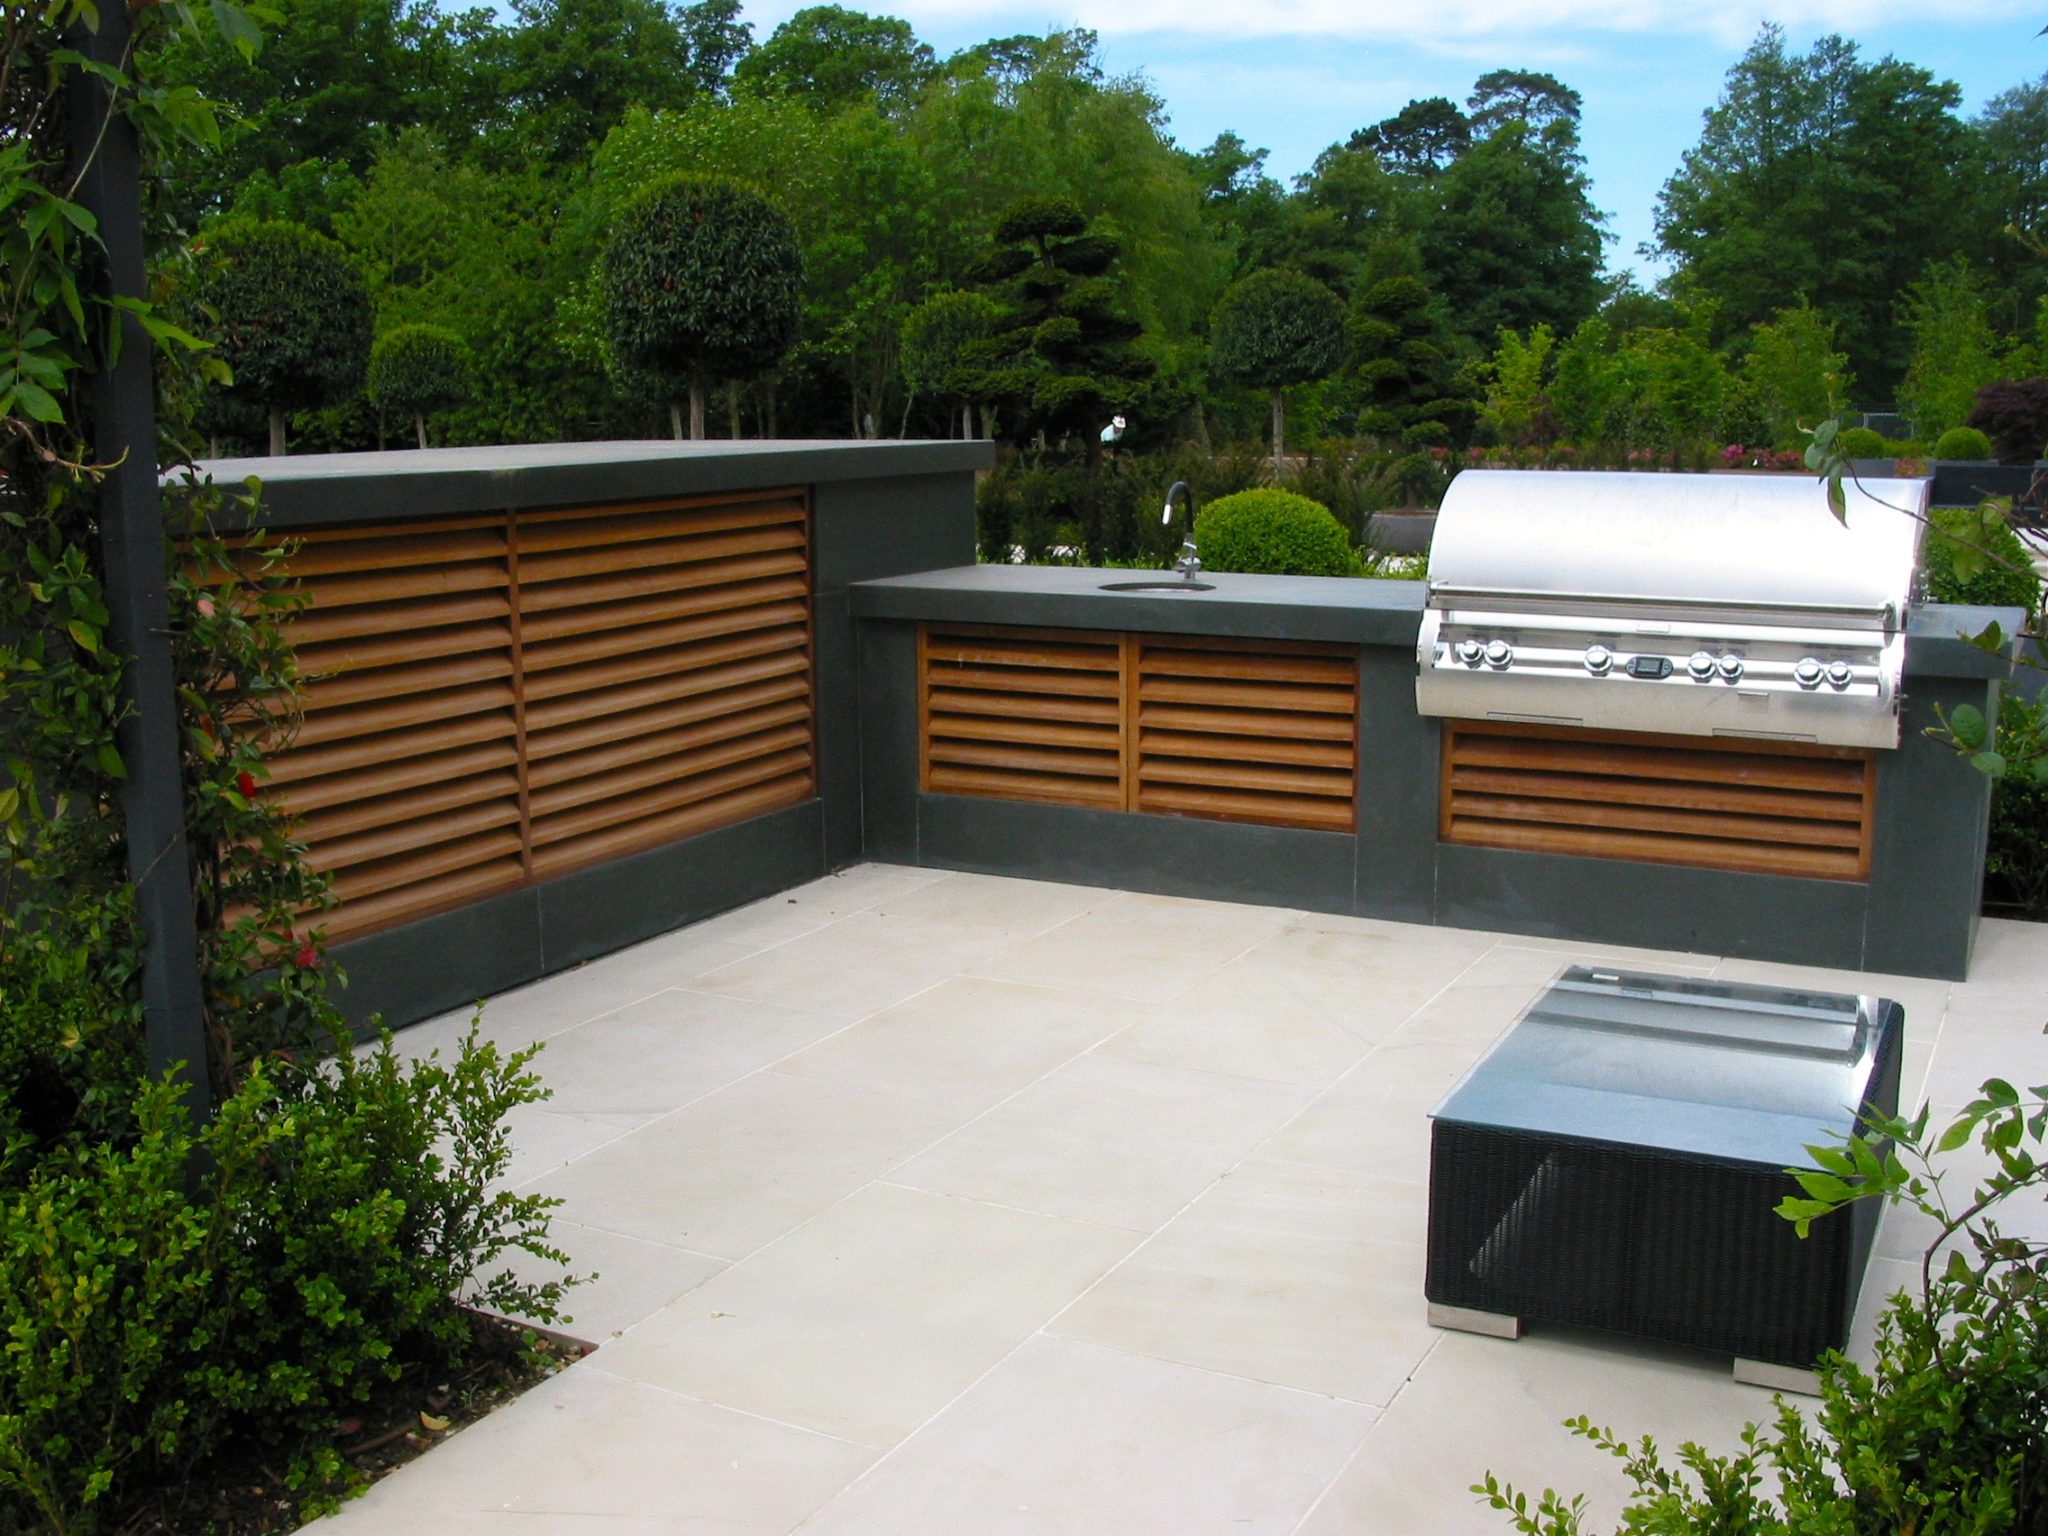 Outdoor Kitchen Design Built Excellence Wood Fired Ovens